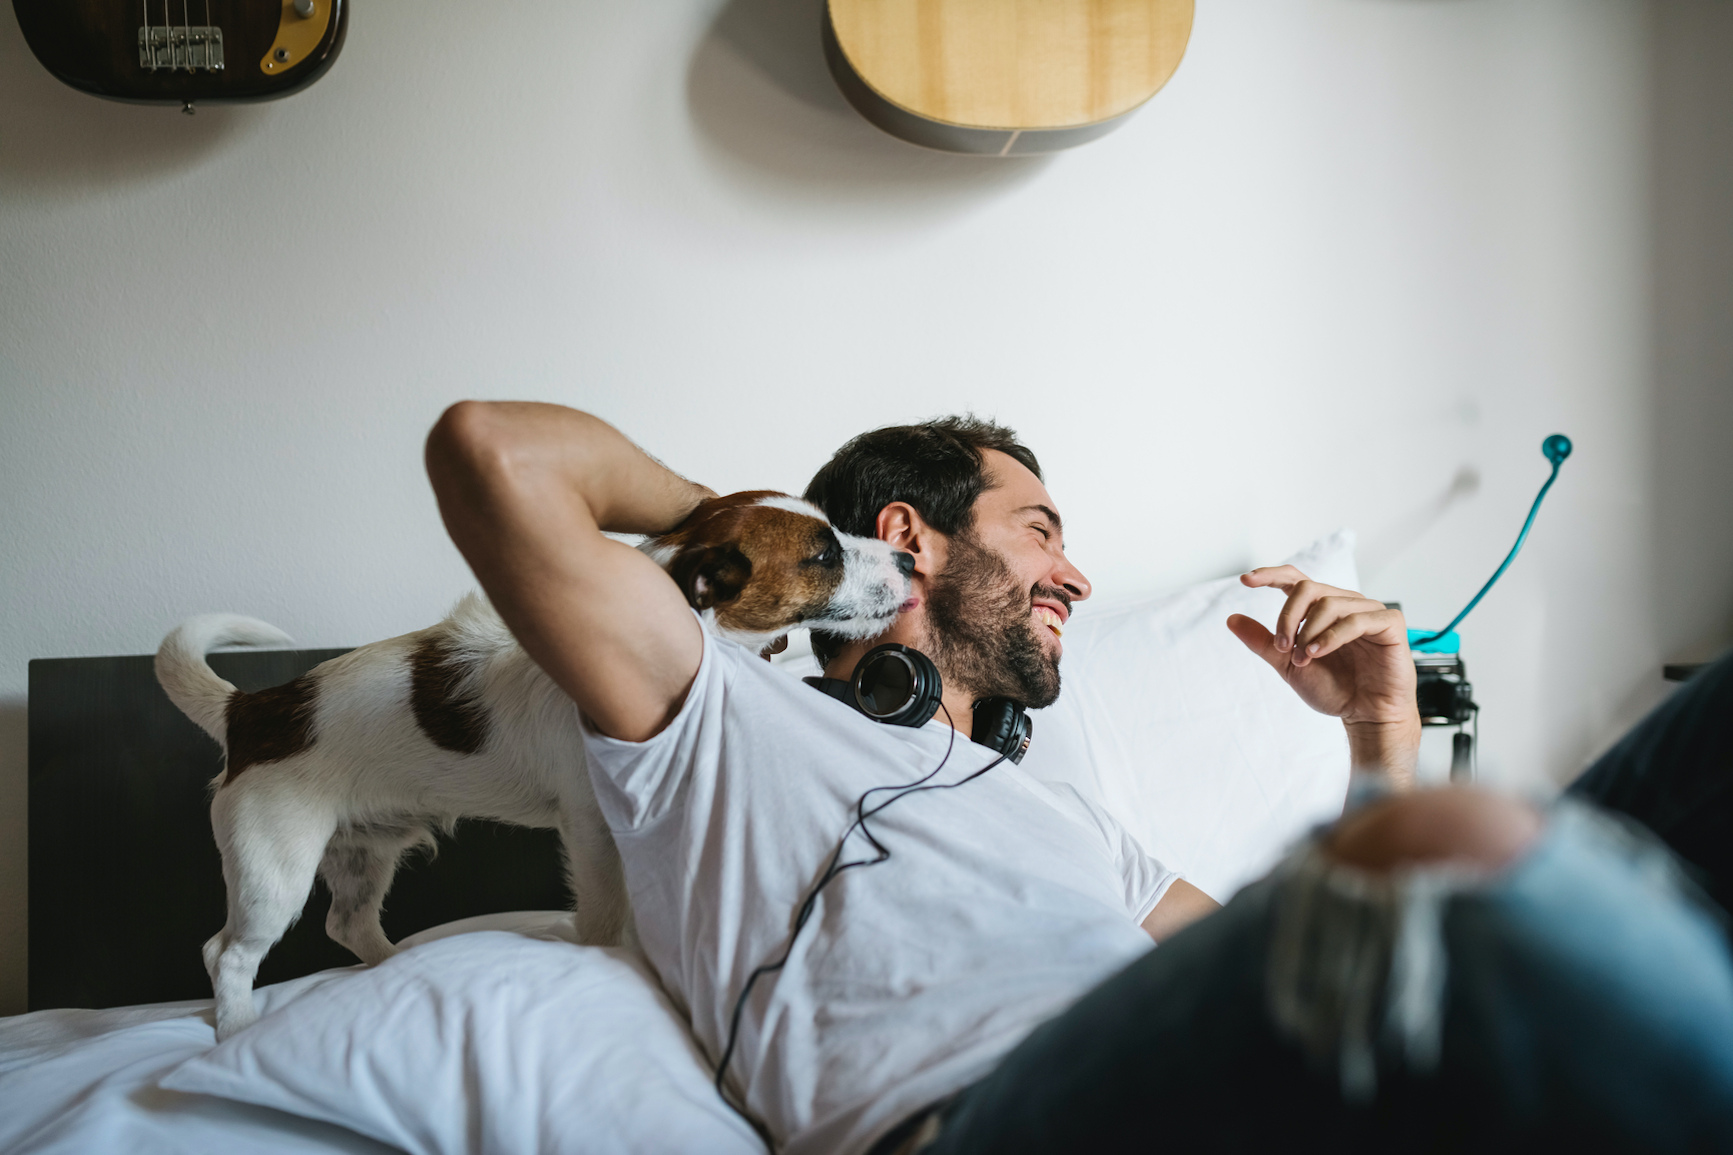 Smiling man playing with puppy in an open floorplan apartment that includes stainless steel appliances and luxury options.